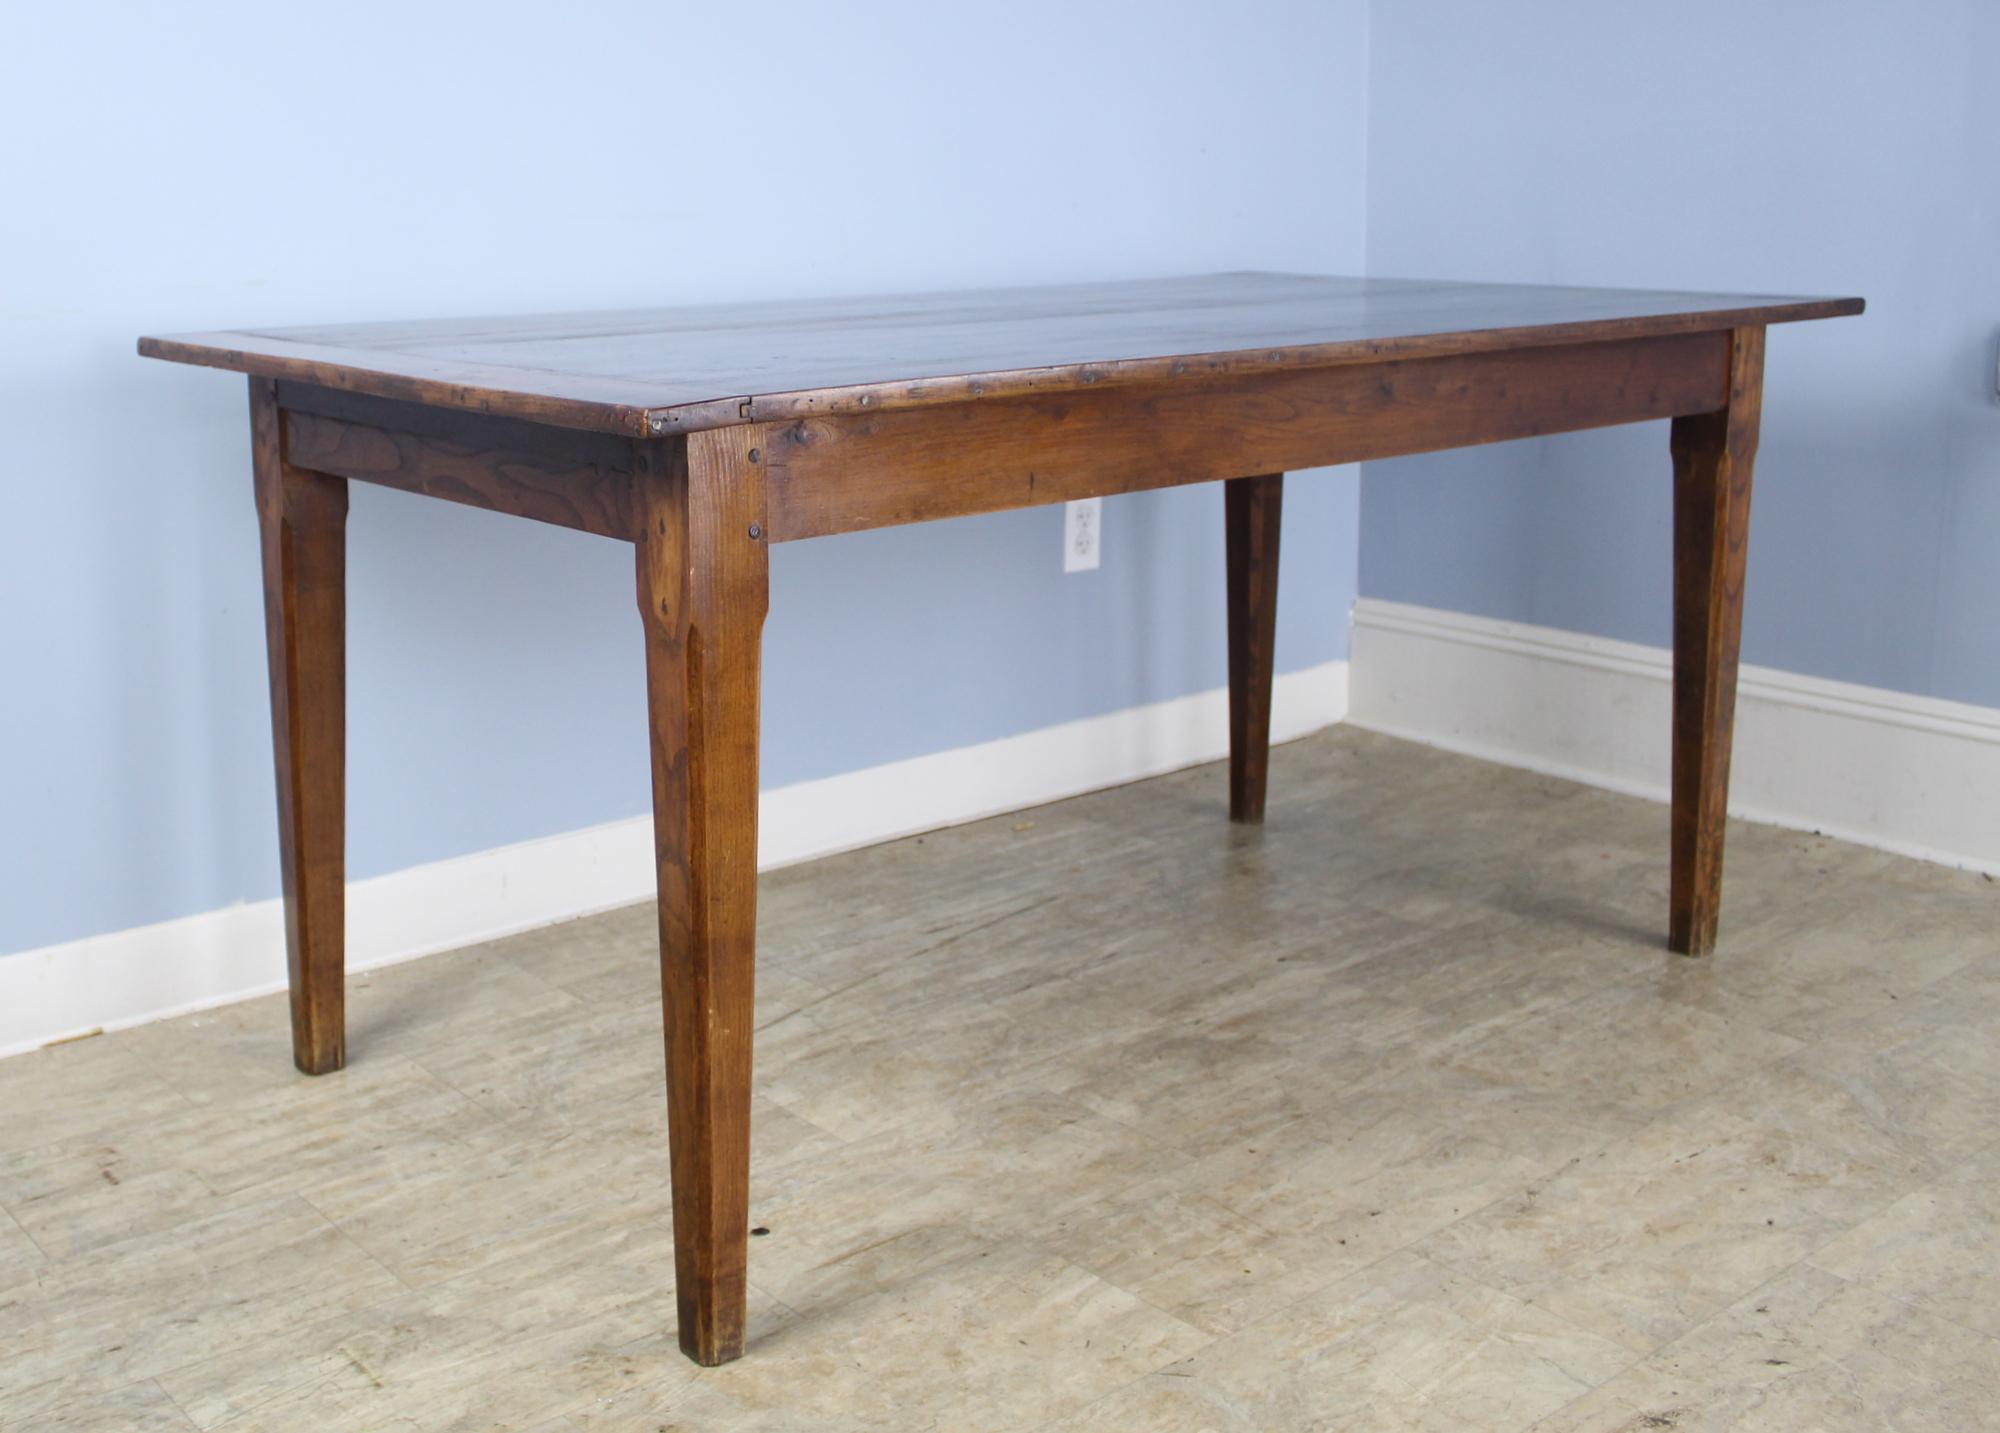 A smaller farm table in well grained elm with breadboard ends. The top is in very good condition with little distress. The legs are classically tapered and pegged at the apron in the traditional manner. The apron height of 24.75